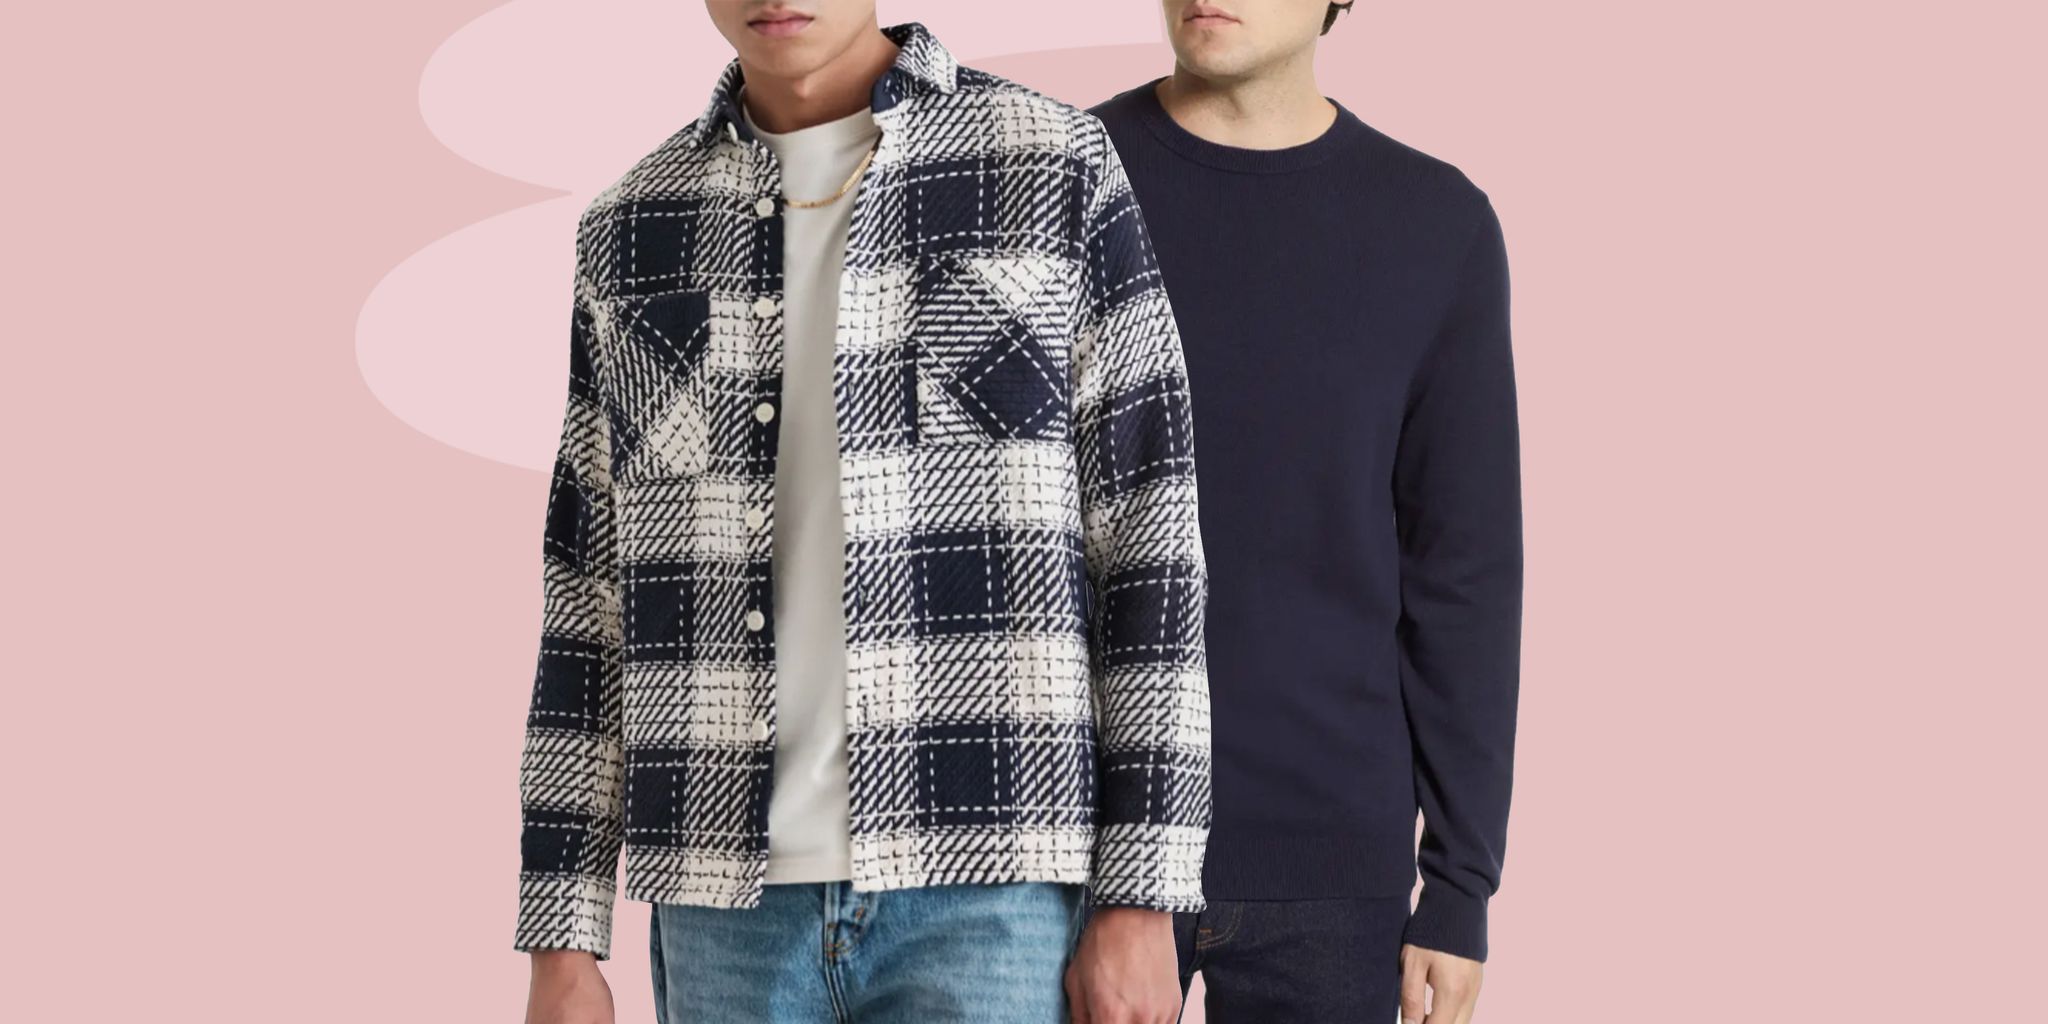 The 20 Best Winter Men's Style Items from Nordstrom 2023